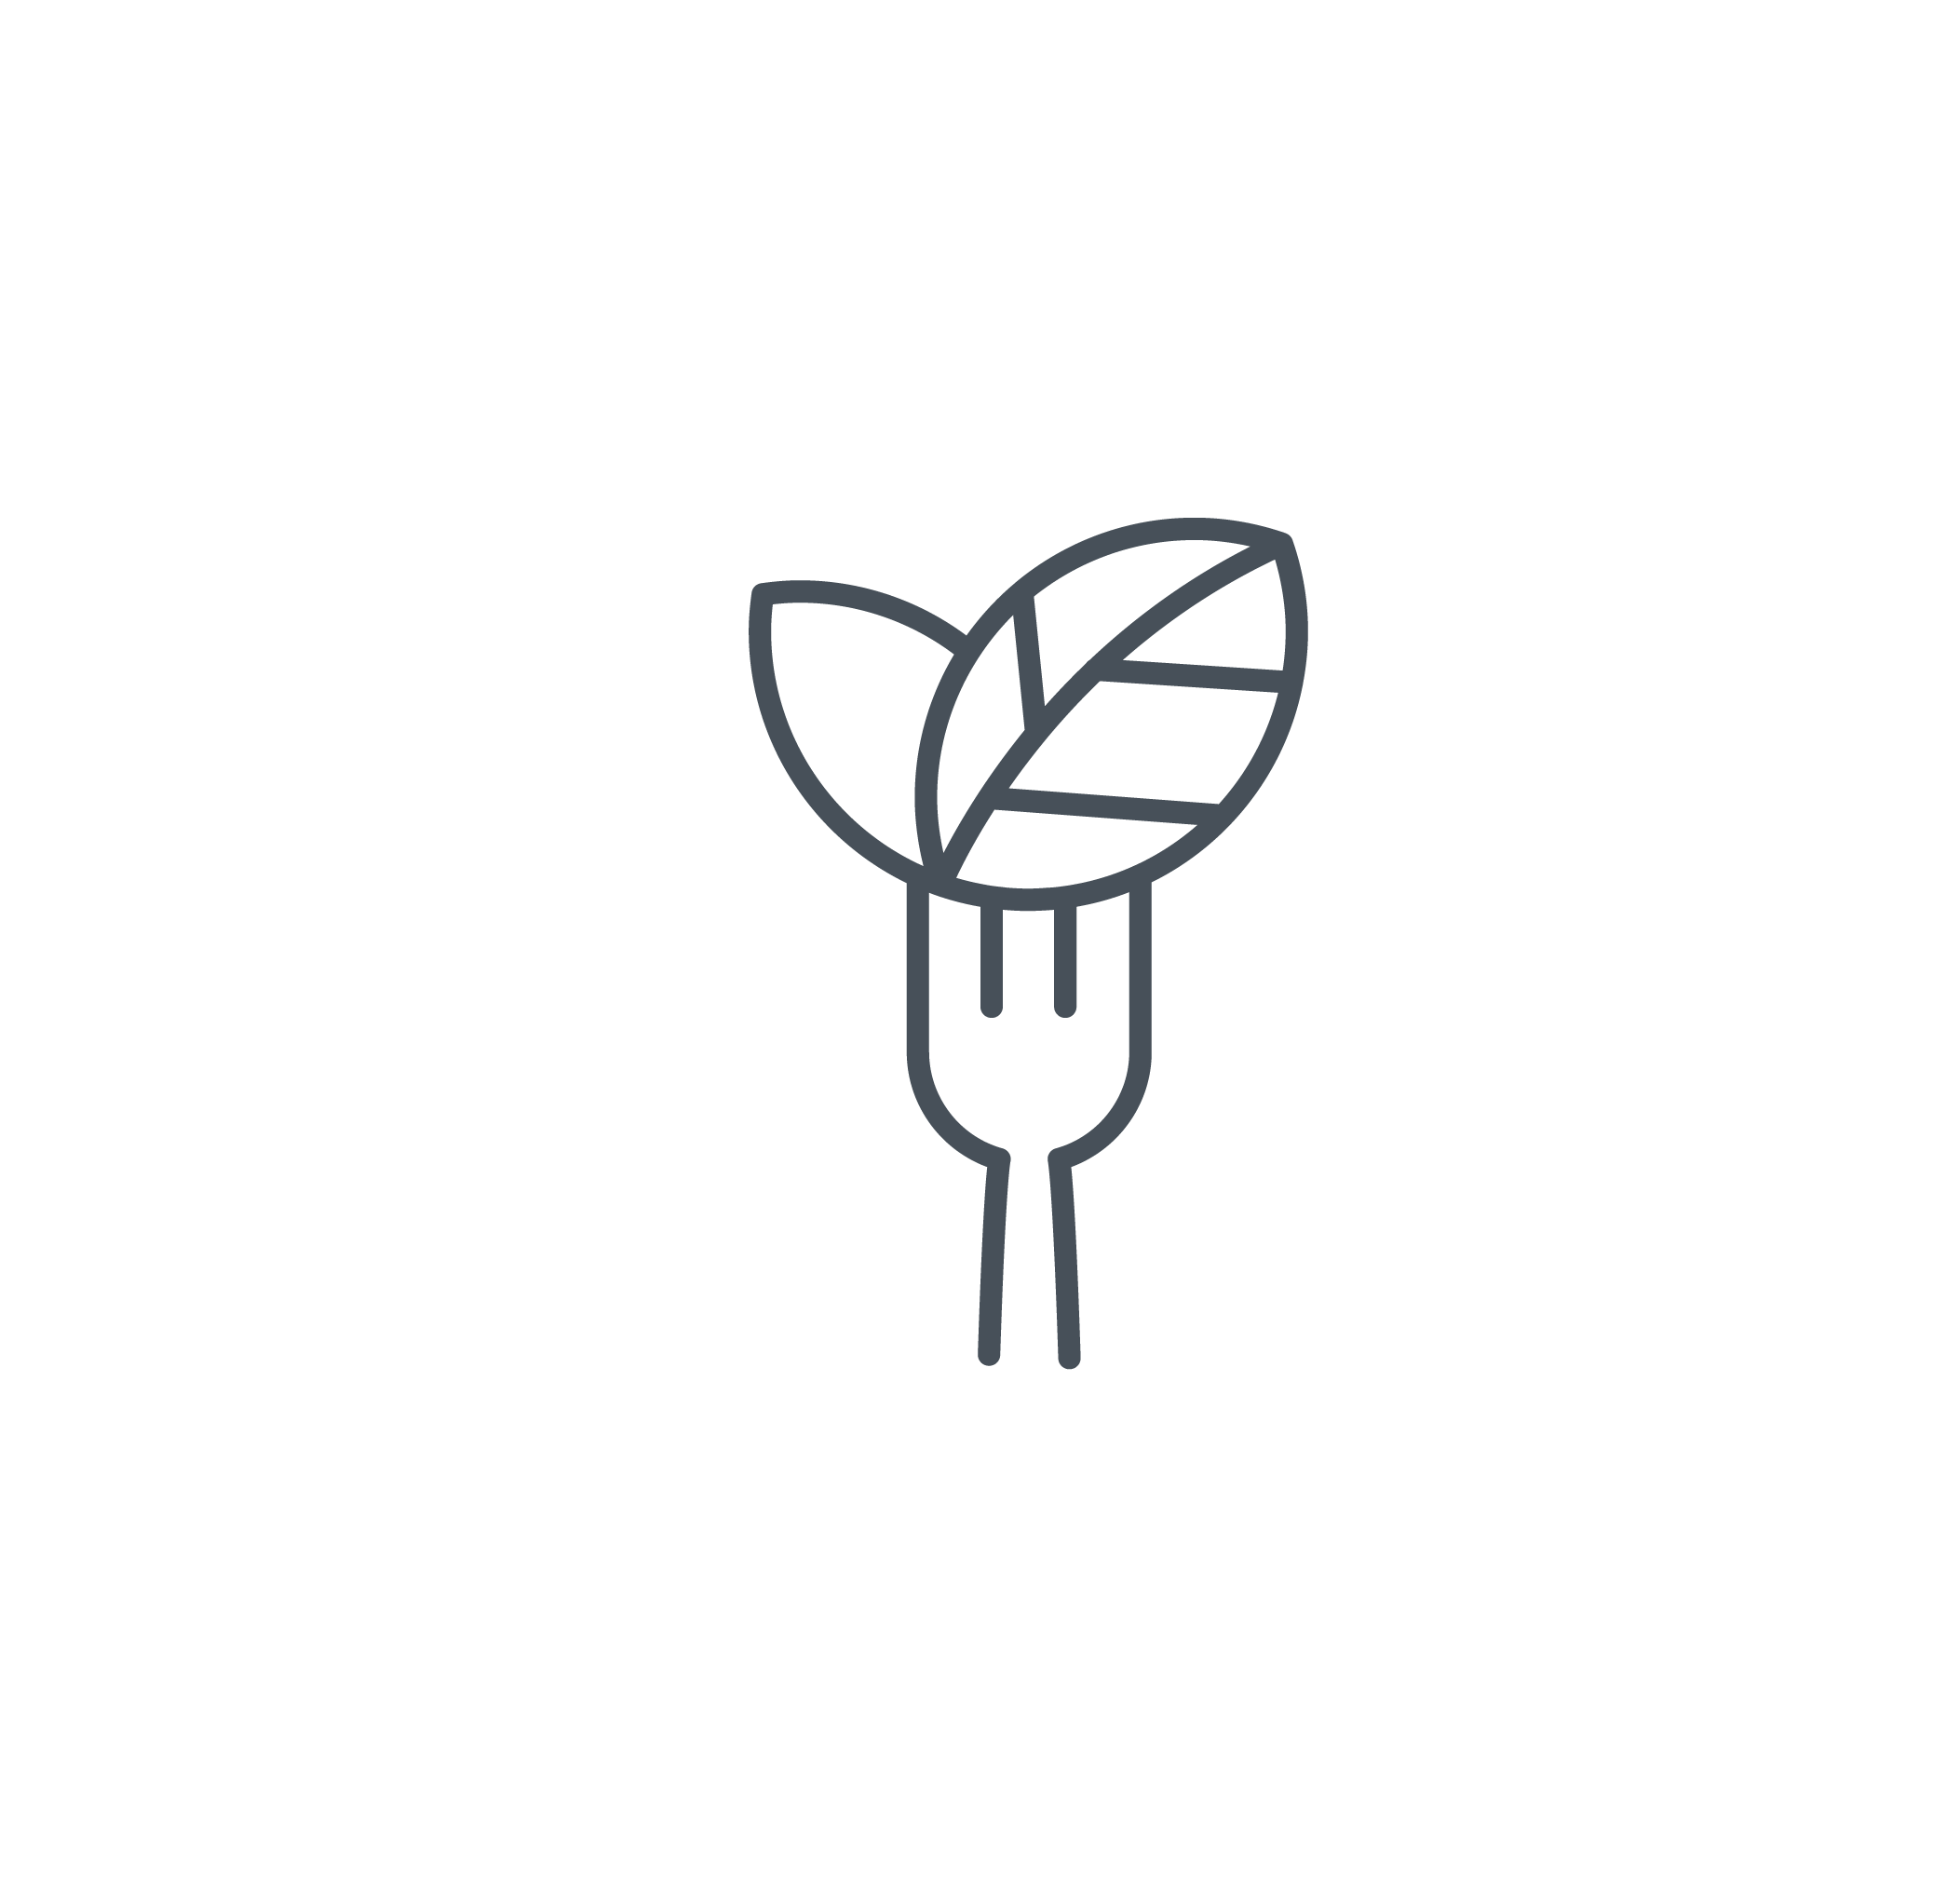 Fork with leafs on end icon